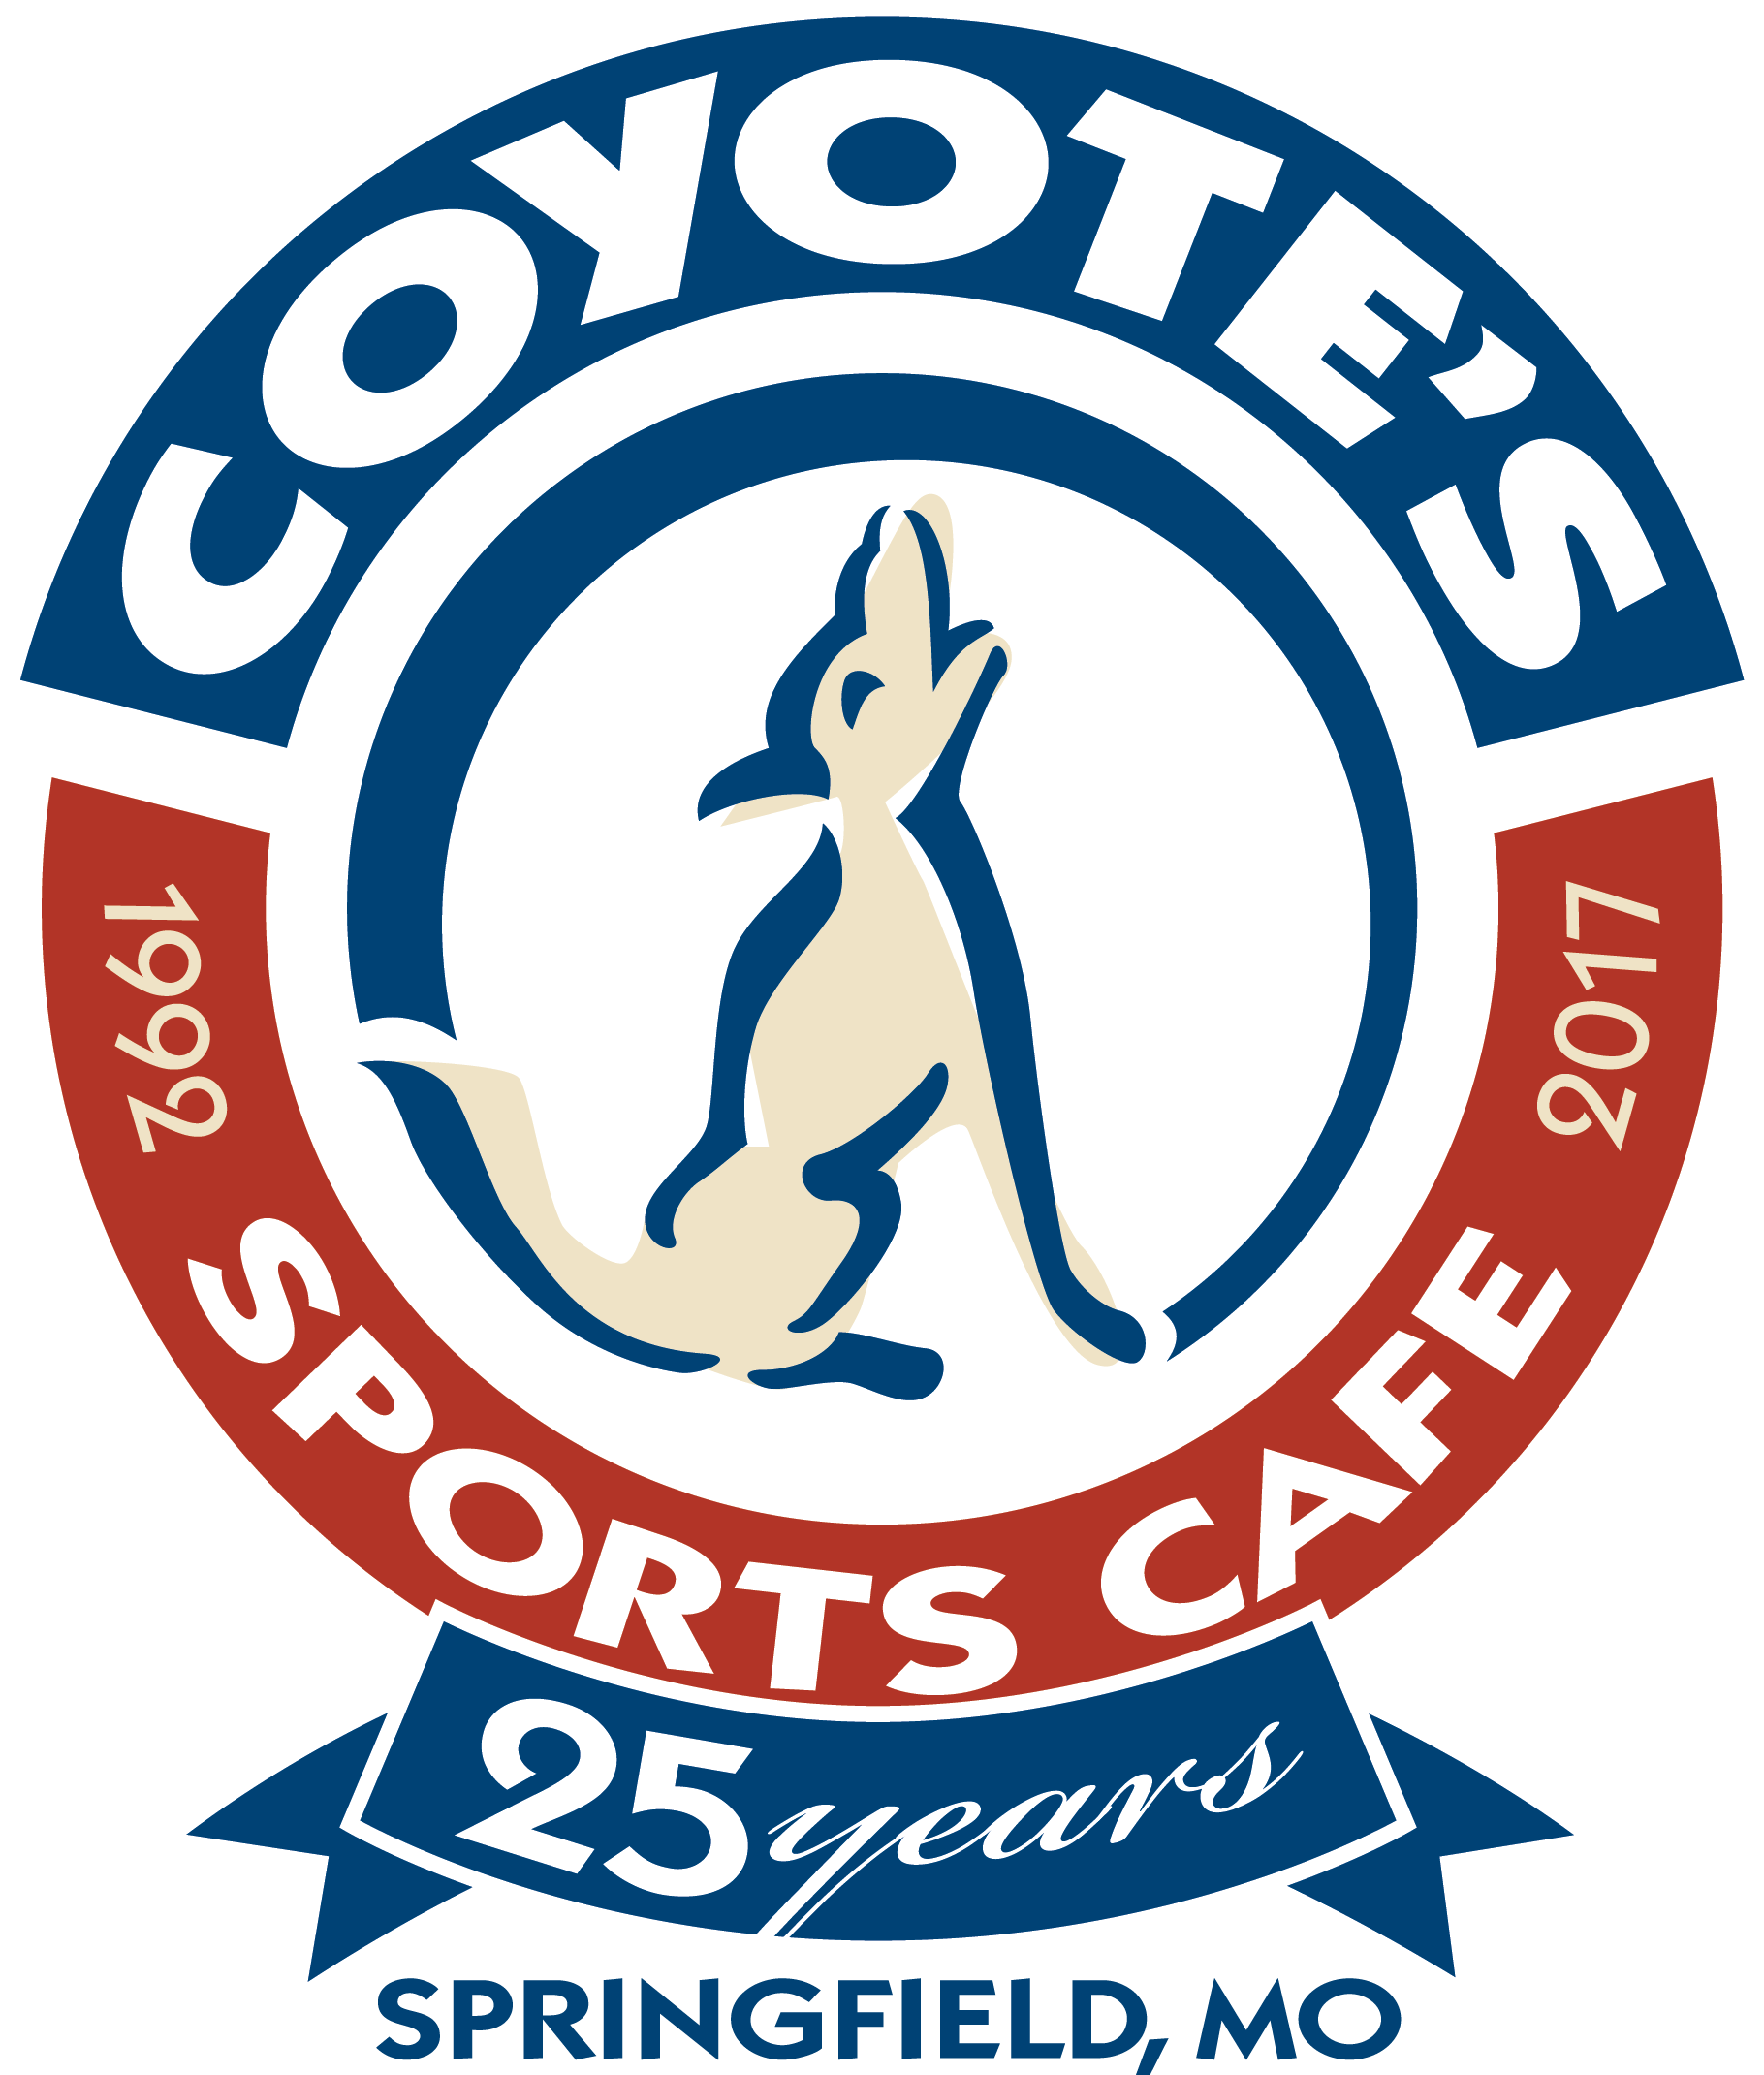 Coyote's Adobe Cafe